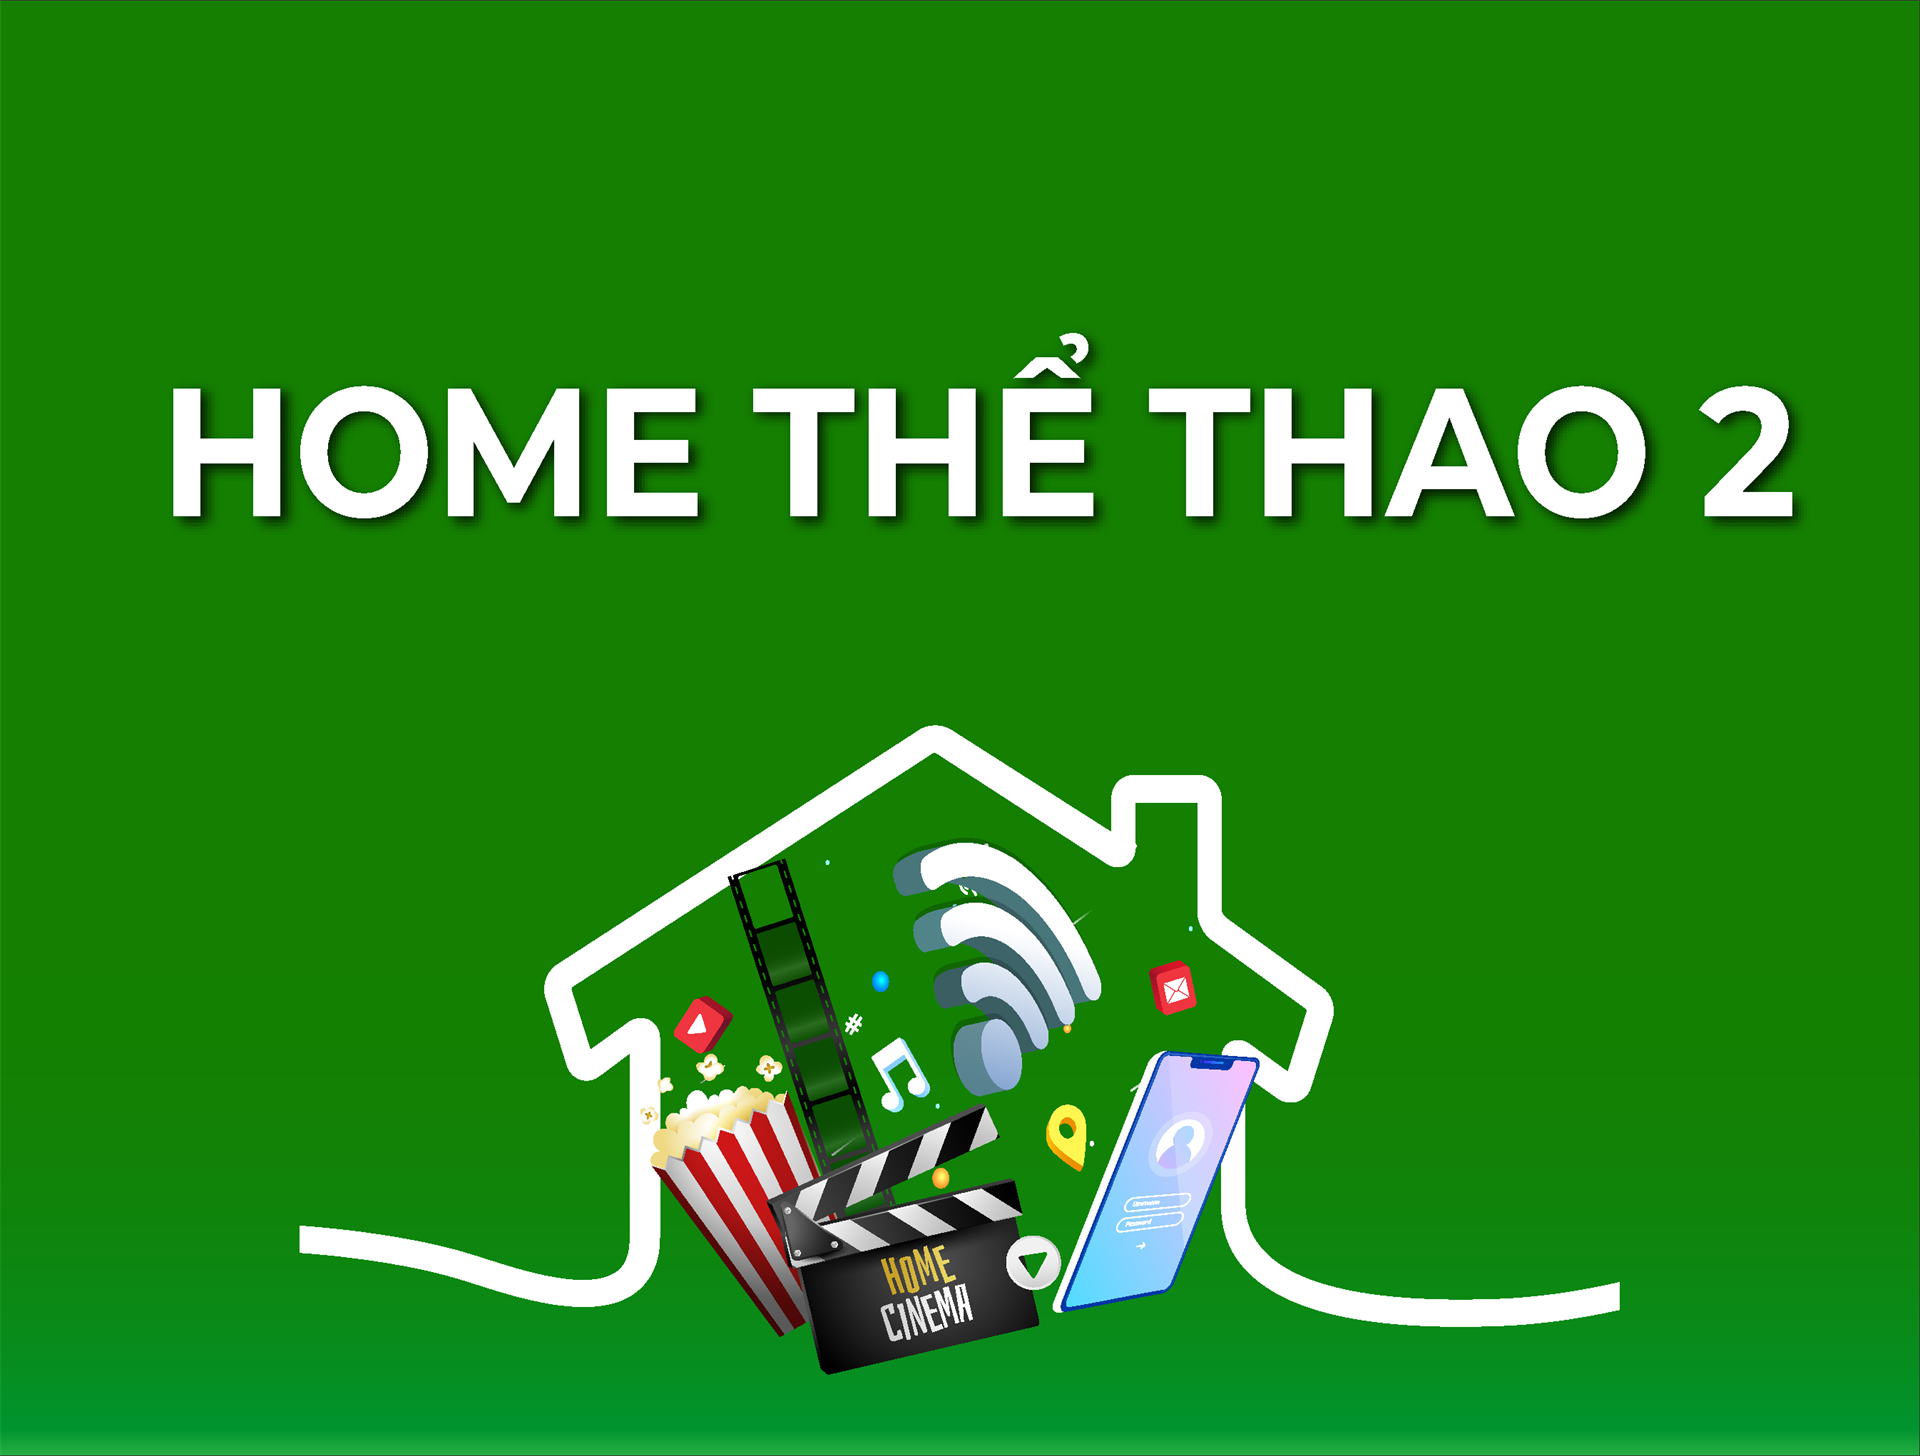 Home Thể Thao 2